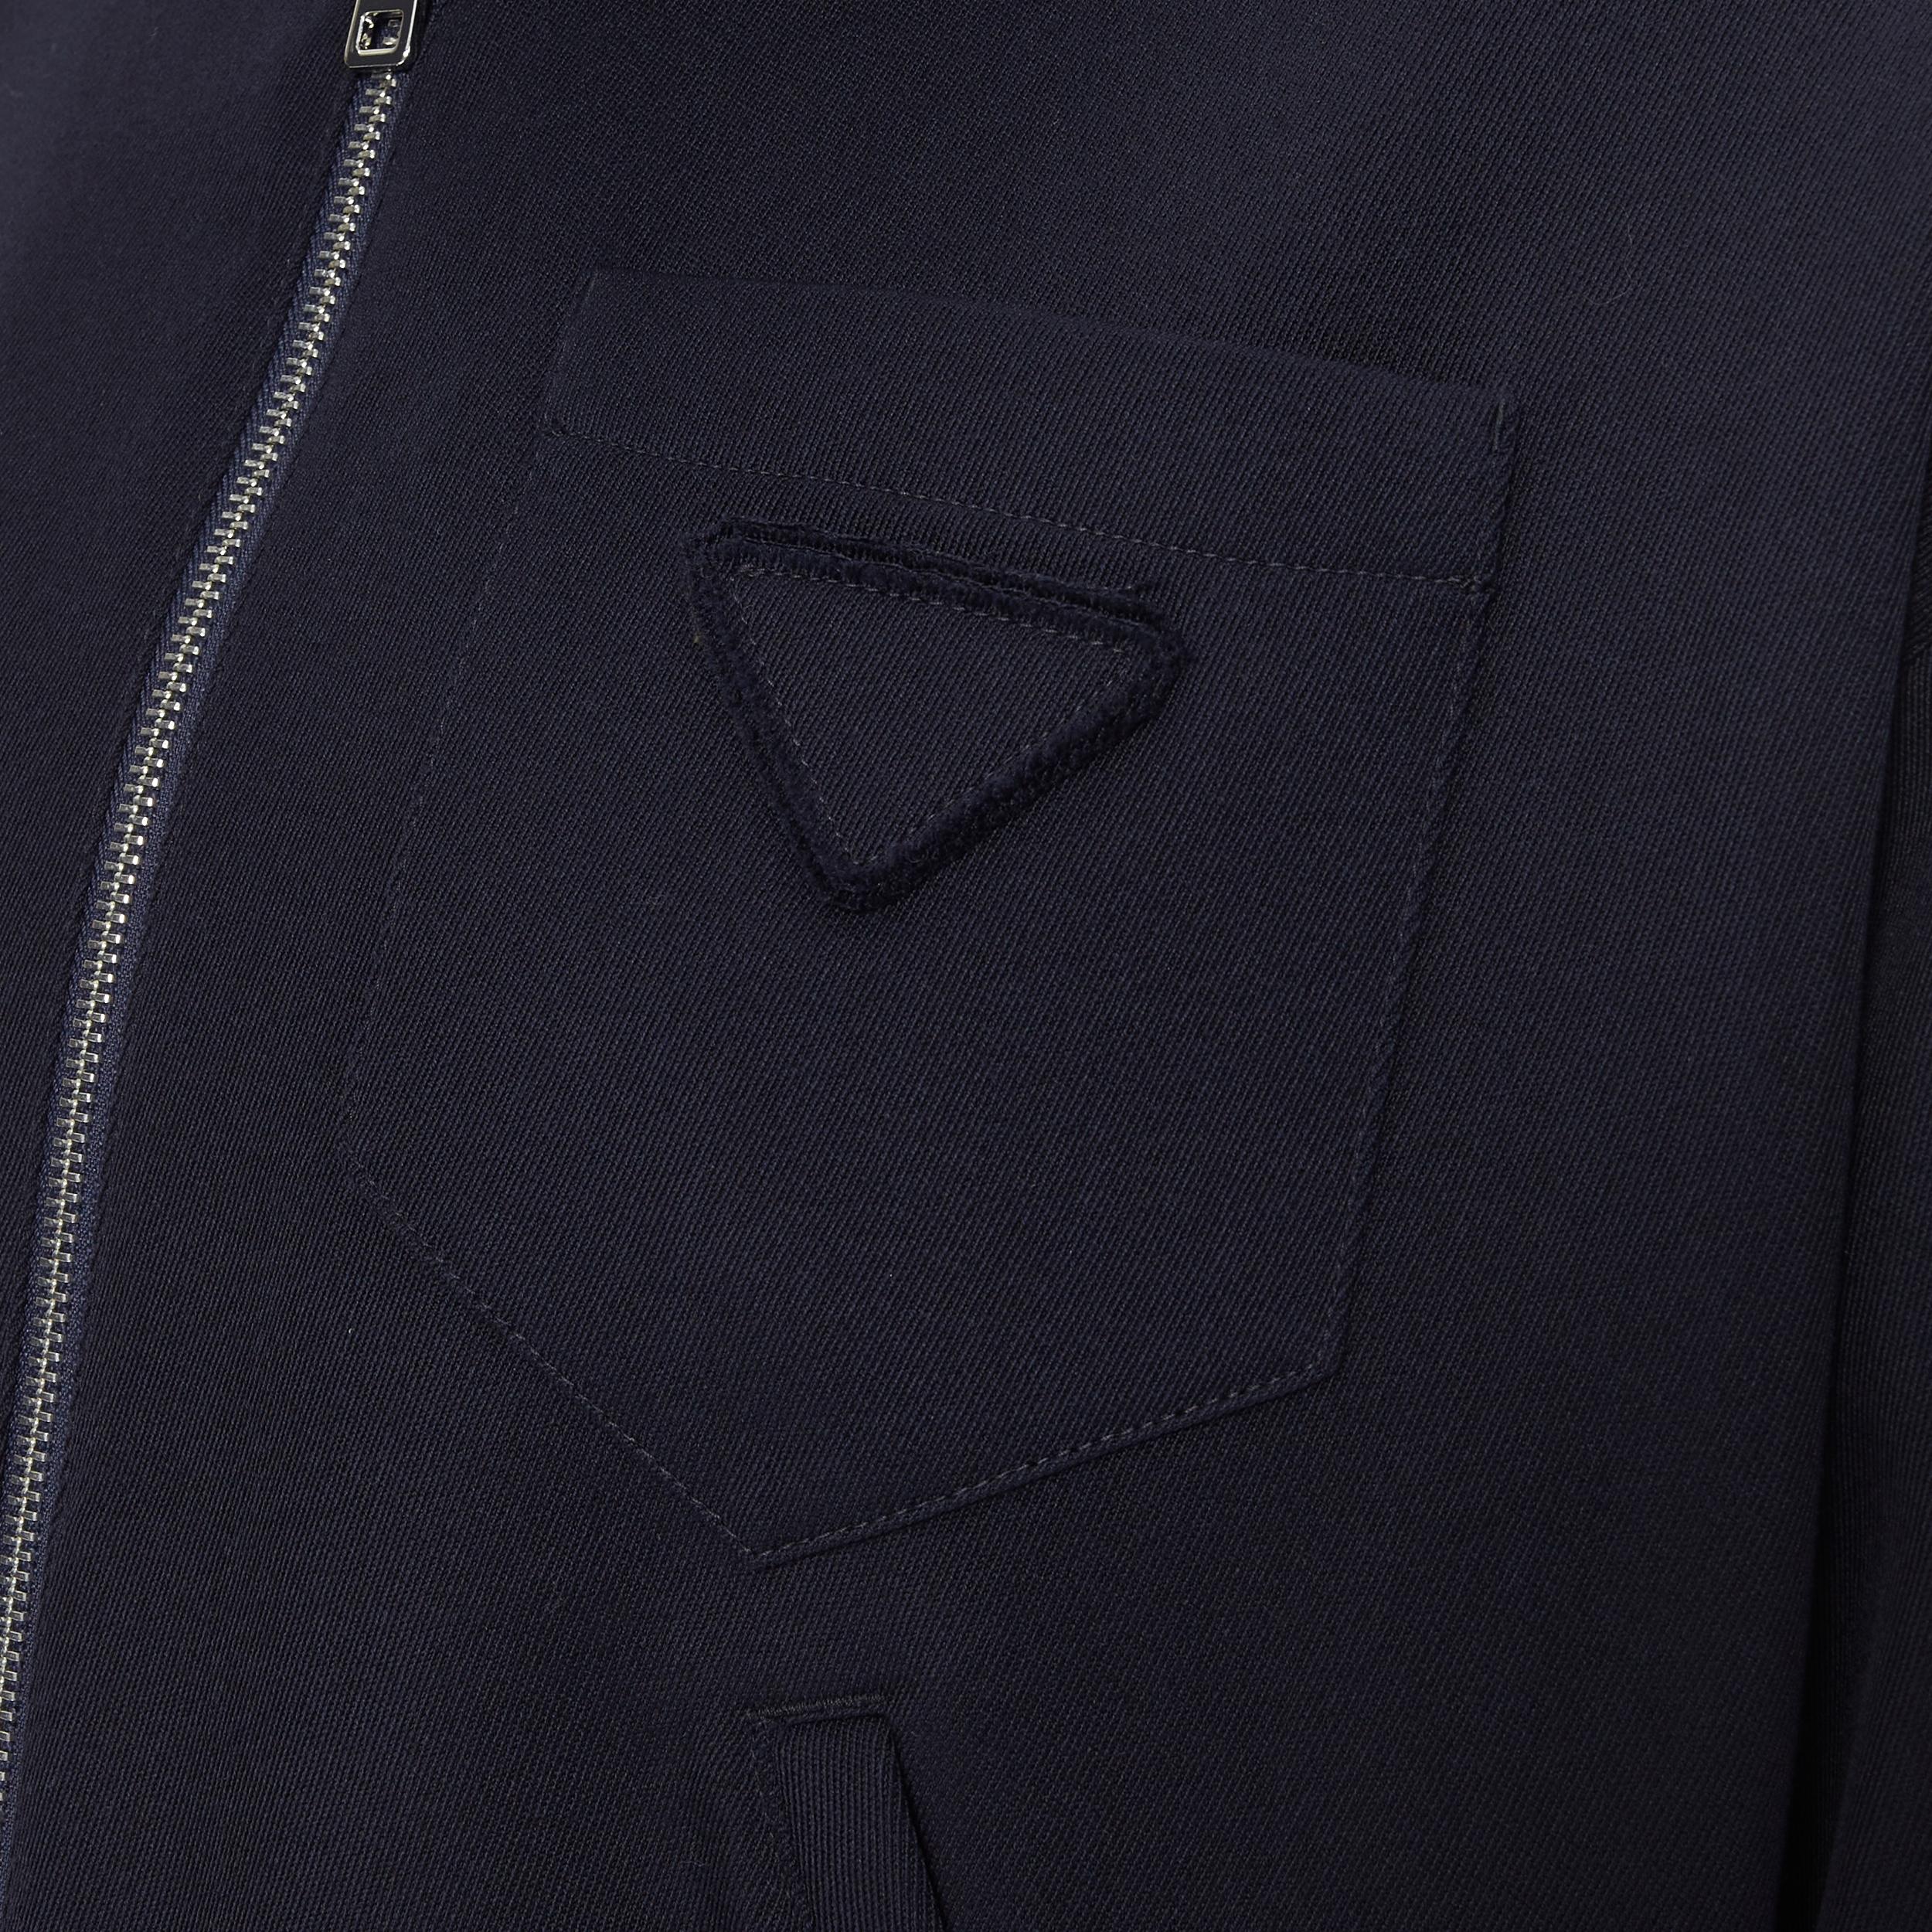 new PRADA 2019 navy blue wool triangle logo pocket cropped zip up hoodie jacket L
Reference: TGAS/B00478
Brand: Prada
Designer: Miuccia Prada
Collection: 2019 
Material: Cotton
Color: Navy
Pattern: Solid
Closure: Zip
Extra Detail: Cotton twill.